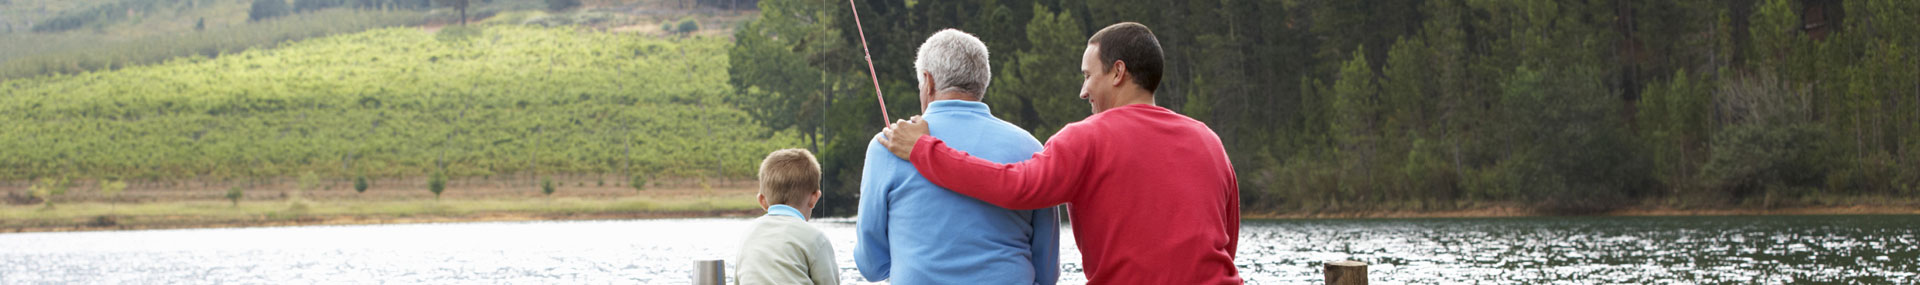 Adult son fishing with elder father and young son symbolizing families that are caring for aging parents and young children.